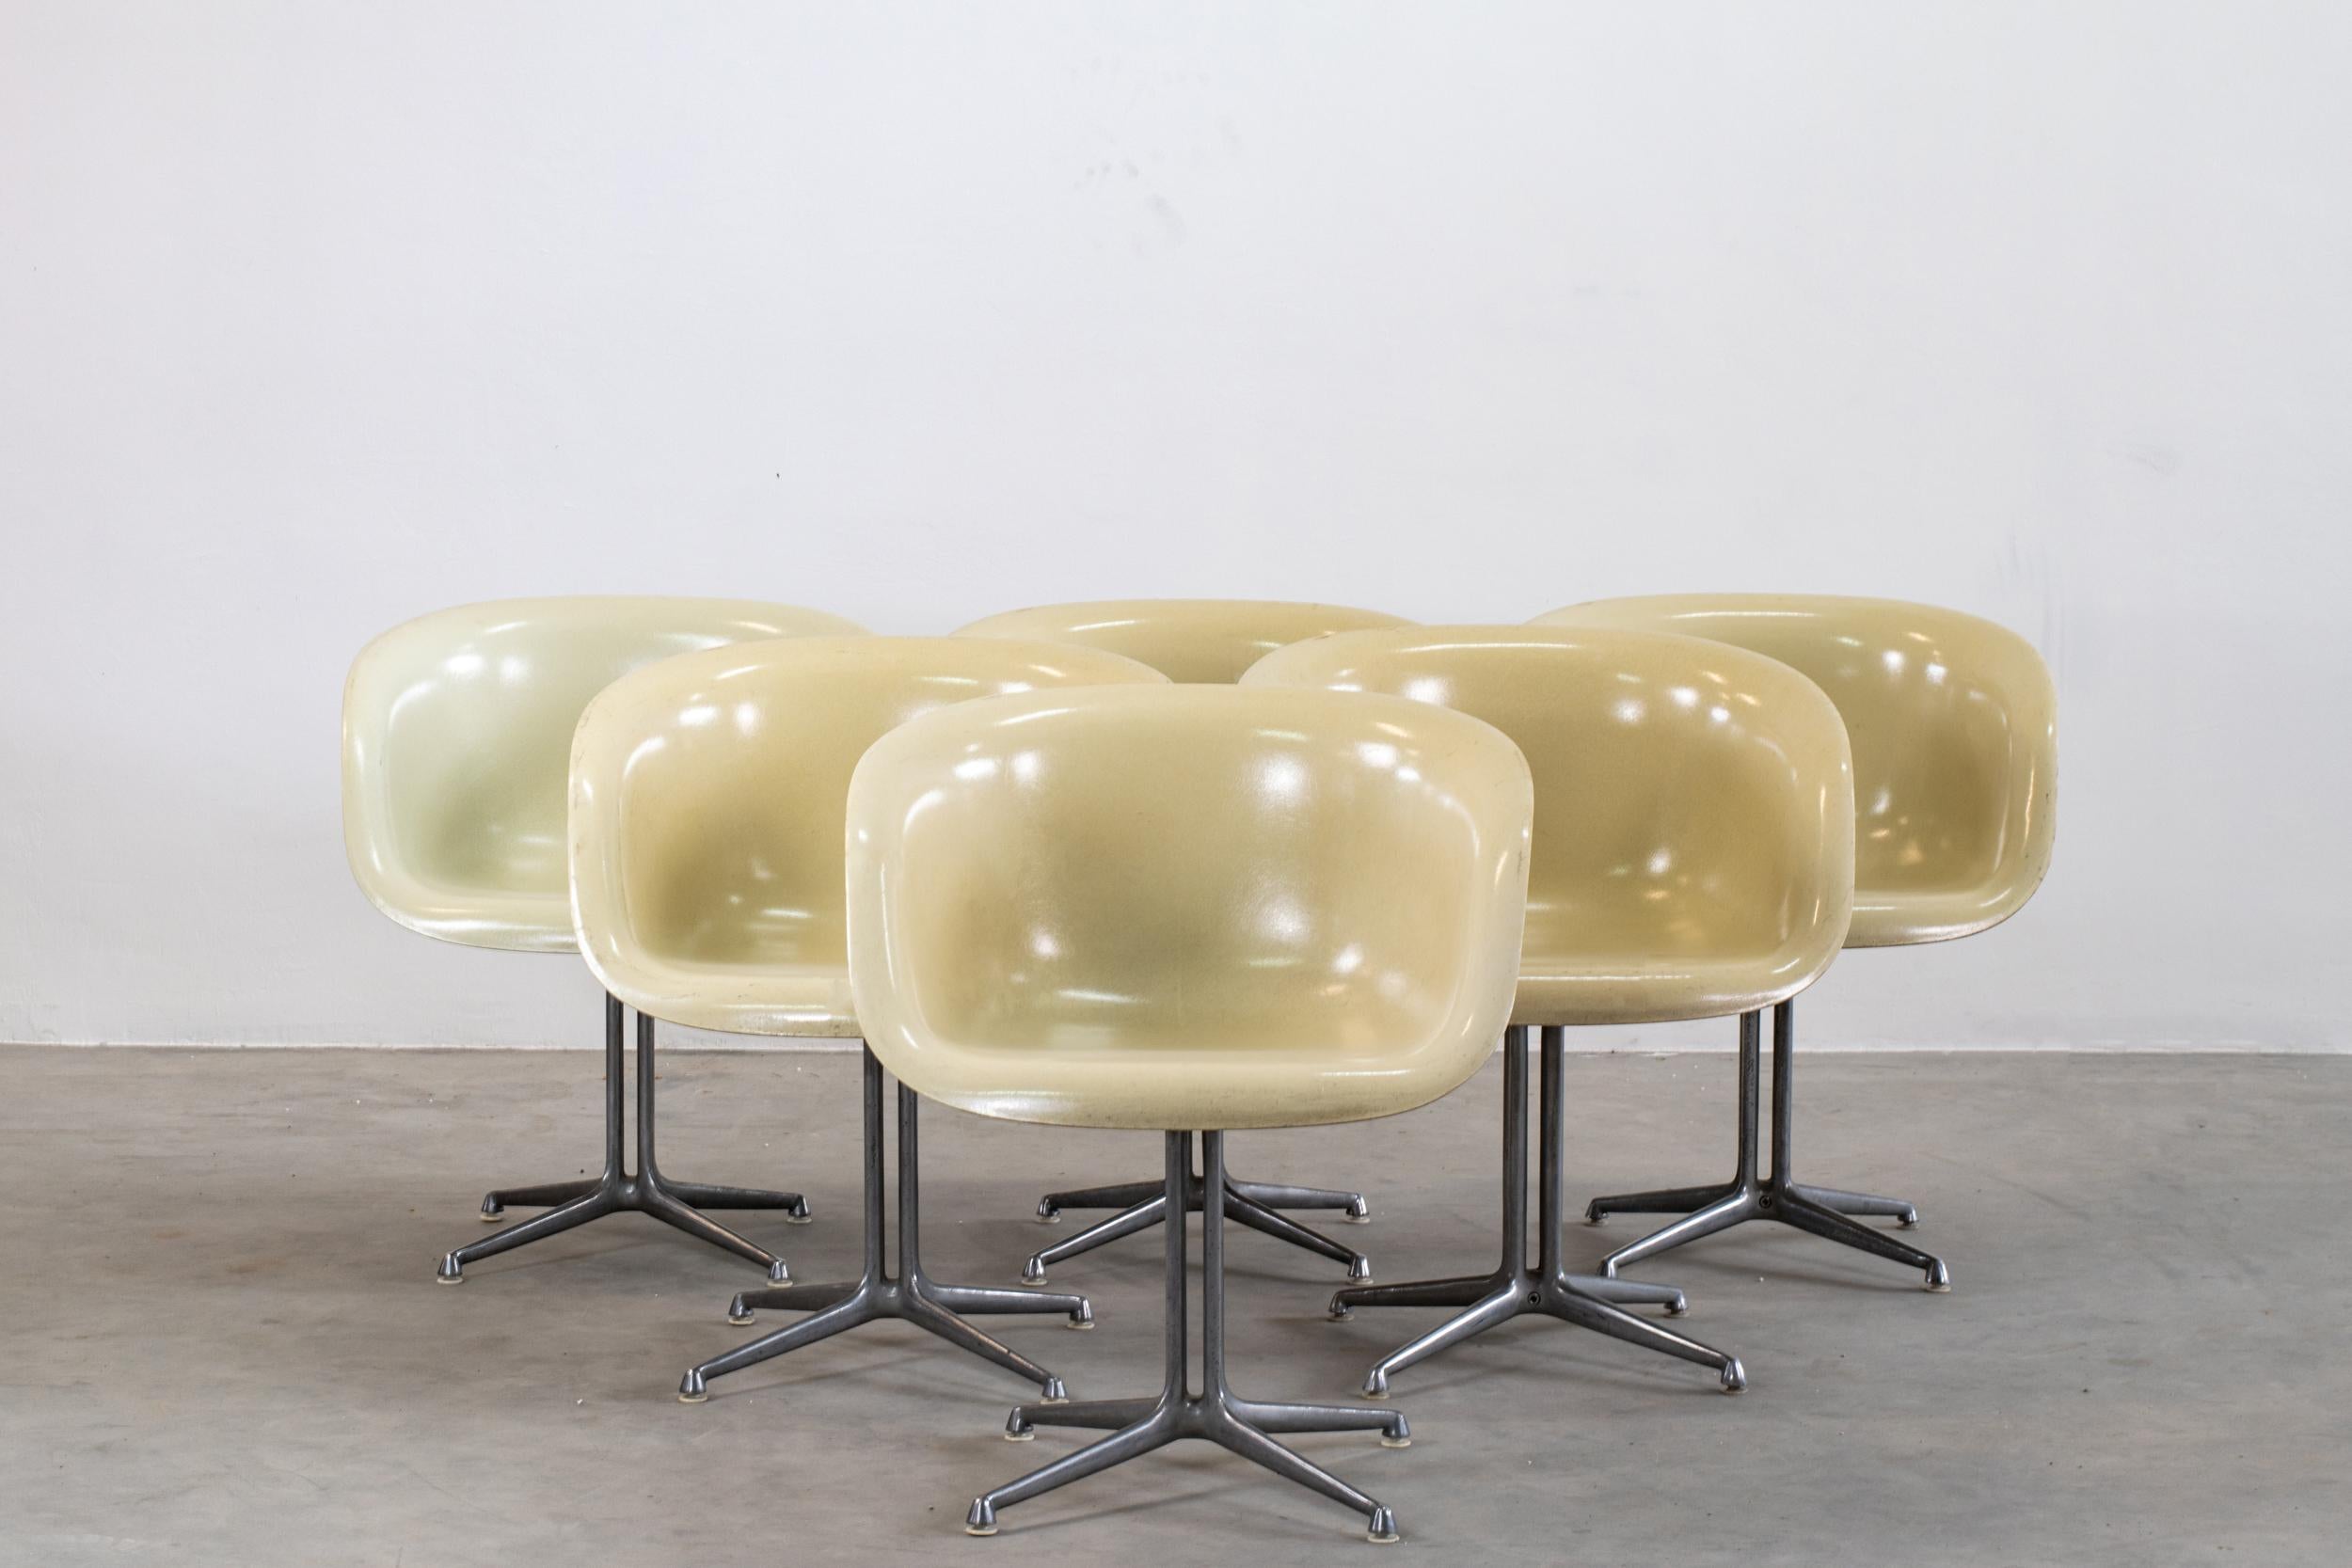 Set of six armchairs mod. La Fonda designed by Charles and Ray Eames for Herman Miller (1960).
Structure in fibreglass and aluminium.
Literature: M. Neuhart, The Story of Eames Furniture, Gestalten, Berlin, 2010, vol. 2, p. 708-712.
  